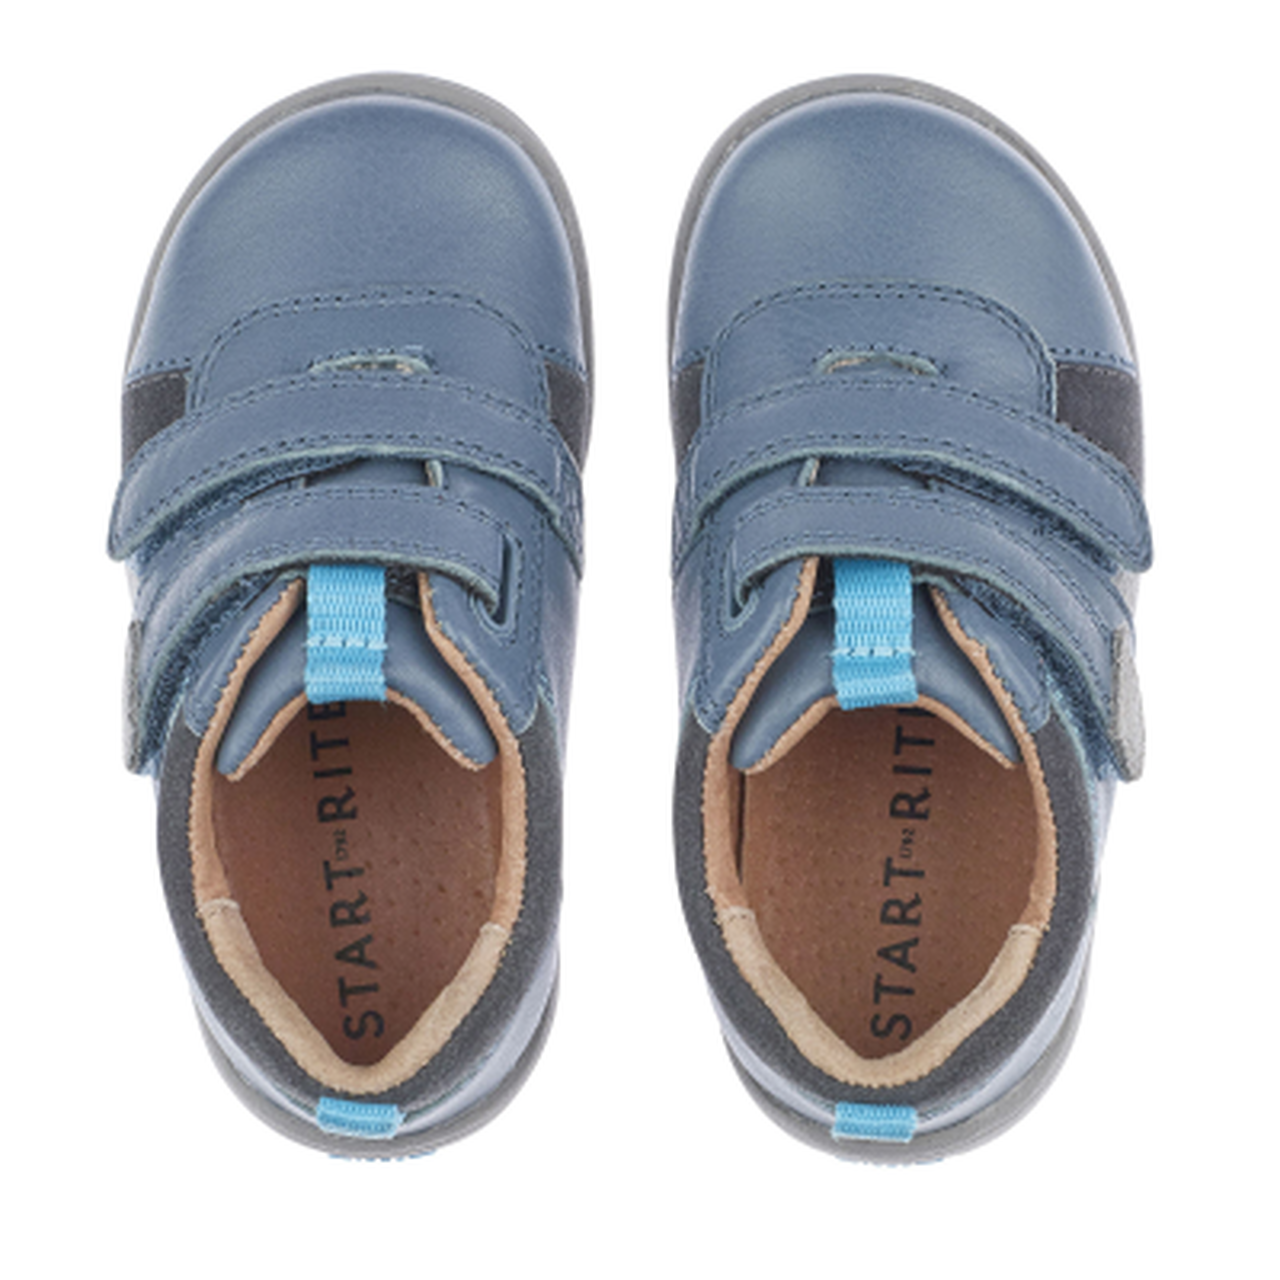 Start-Rite Grip 1697-2 Boys Blue Leather Rip Tape Shoes G Fit - elevate your sole